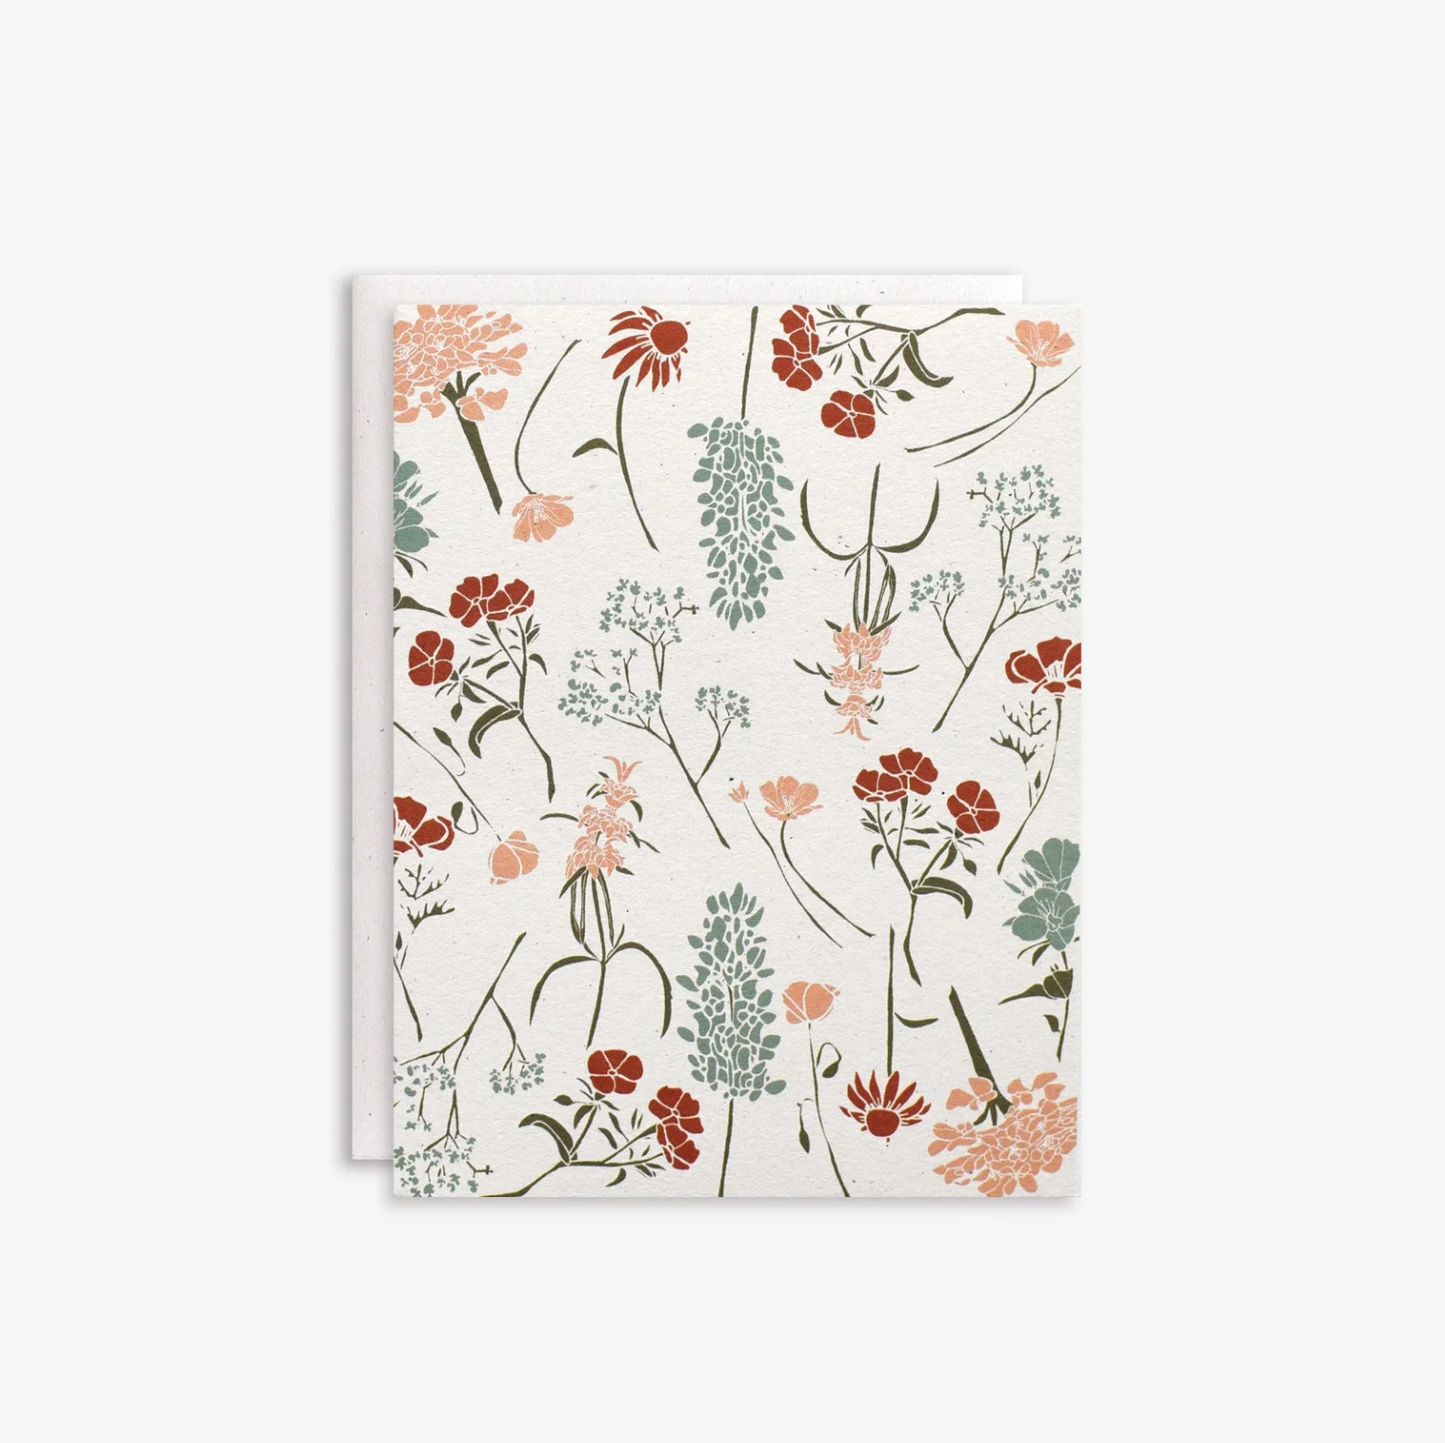 Wildflowers by Region Cards Boxed Set